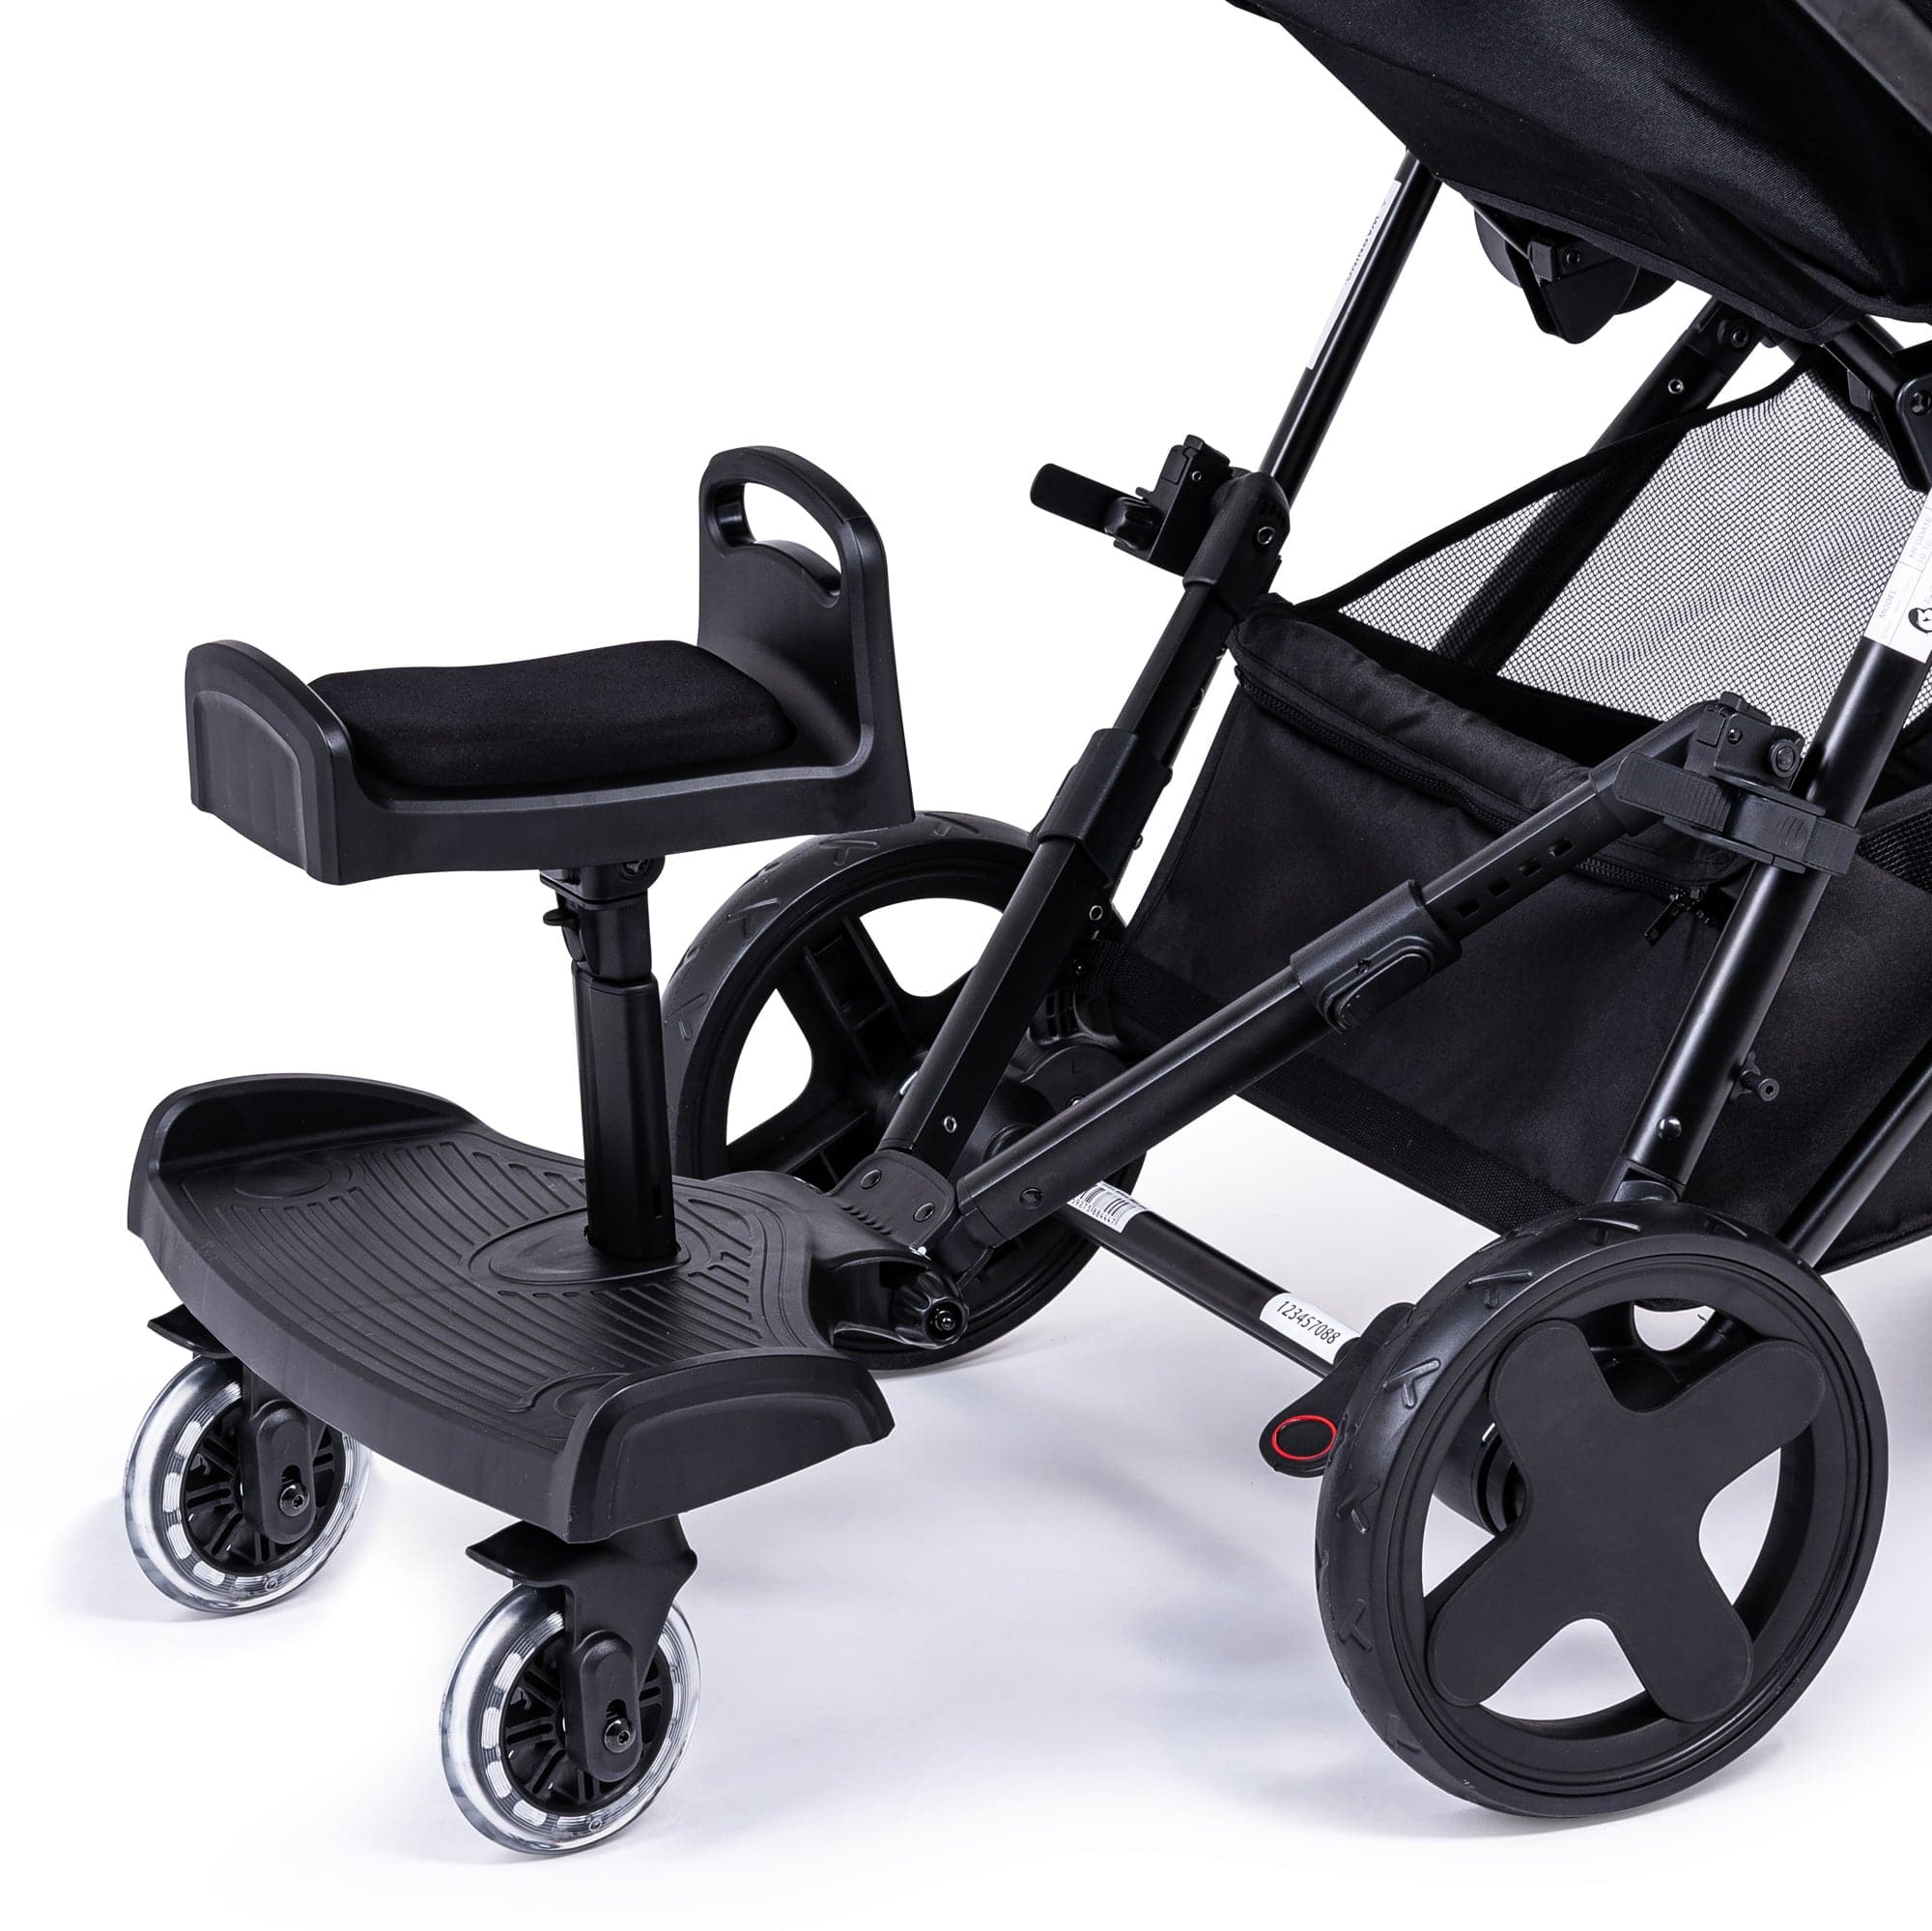 Ride On Board with Saddle Compatible with Baby Jogger - For Your Little One